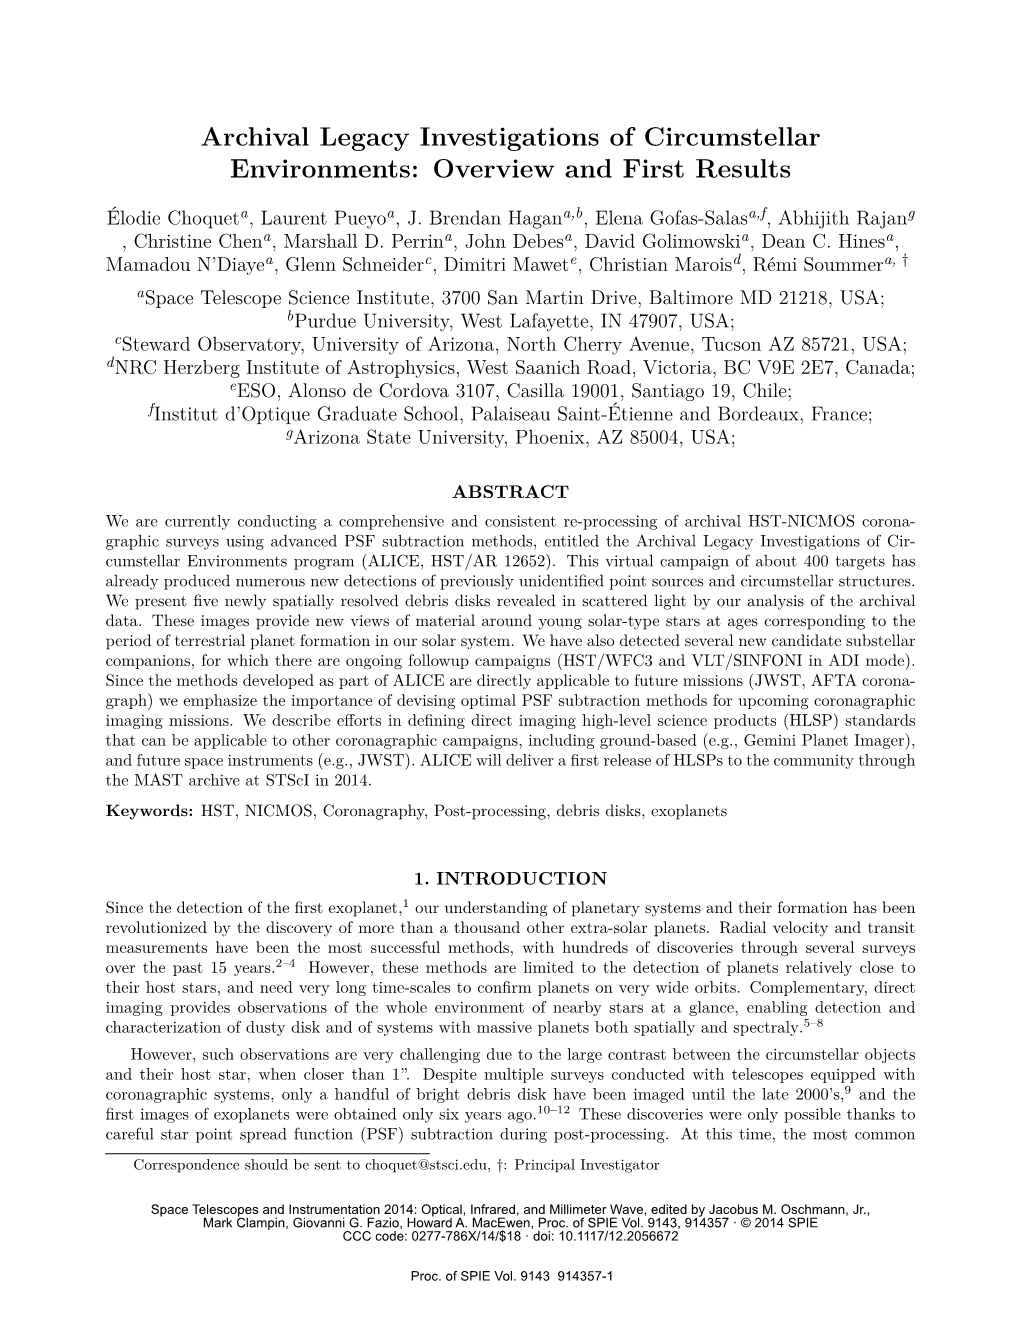 Archival Legacy Investigations of Circumstellar Environments: Overview and First Results